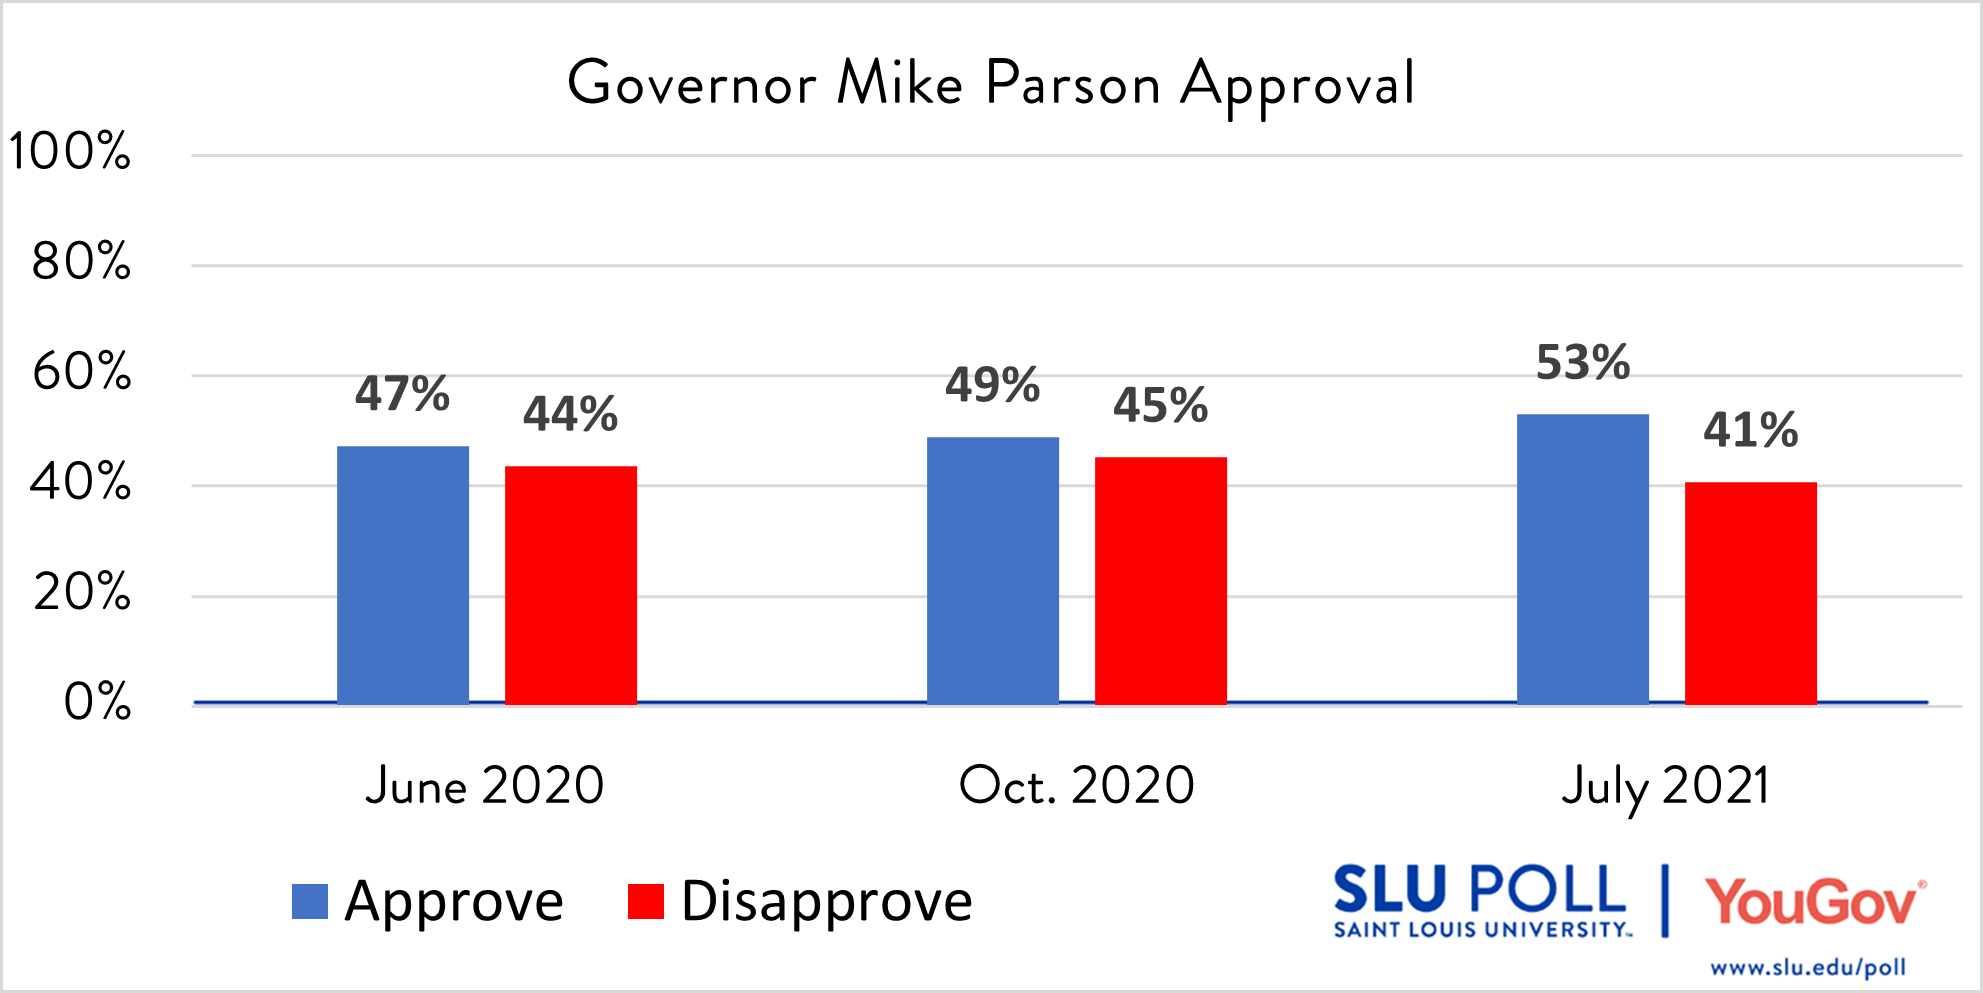 Do you approve or disapprove of the way each is doing their job…Governor Mike Parson?  - Strongly Approve: 14% - Approve: 39% - Disapprove: 16% - Strongly Disapprove: 25%  - Not Sure: 6%